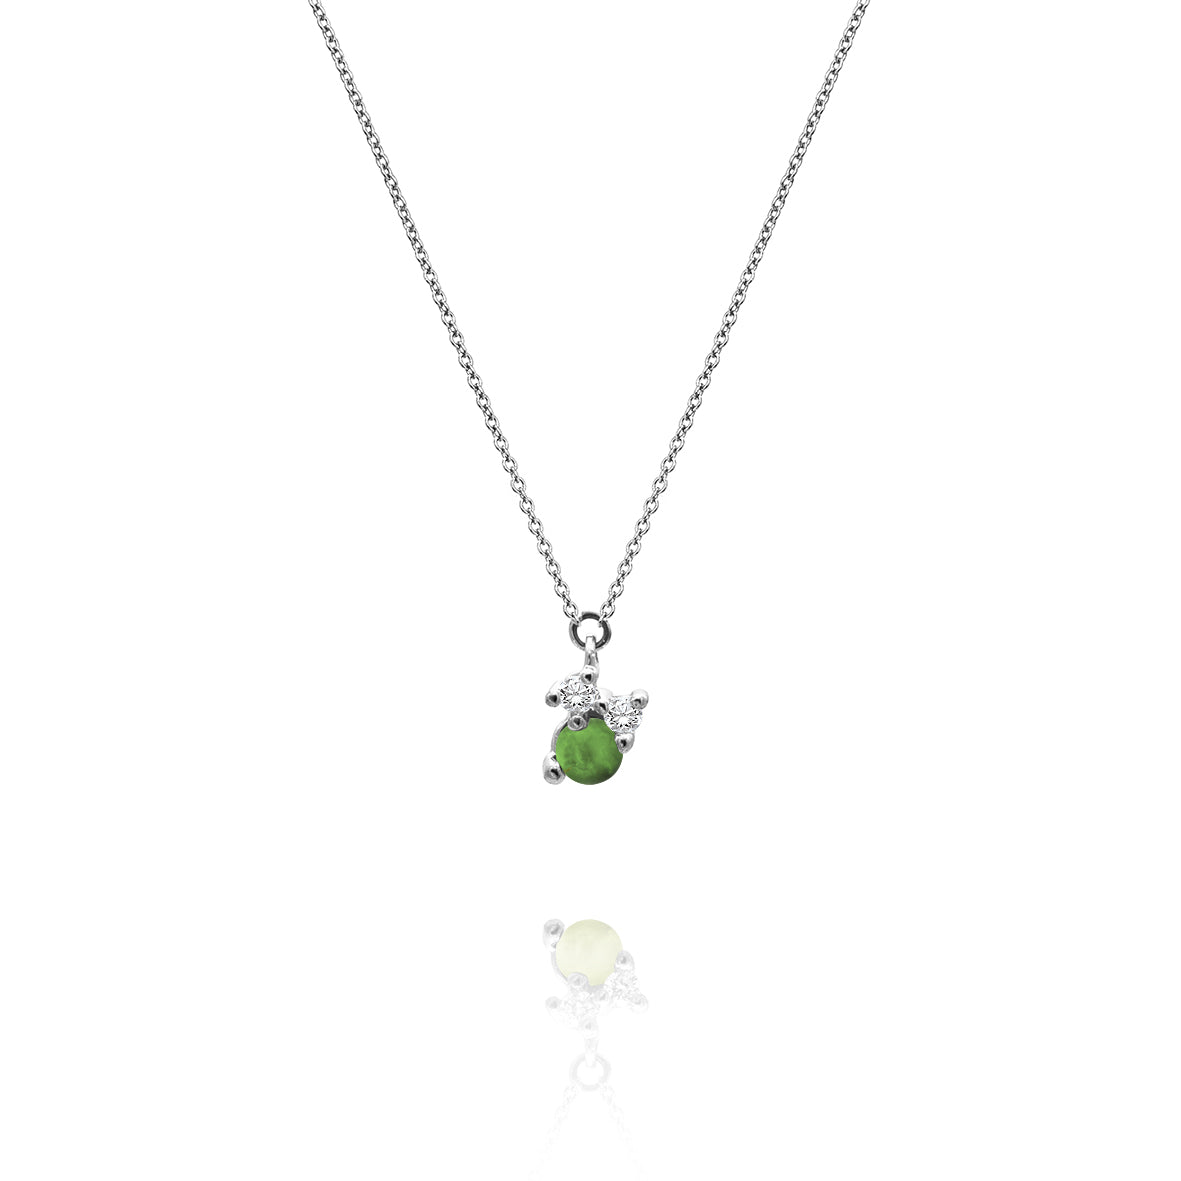 Stellini pendant "smal" in 585/- gold with green tourmaline